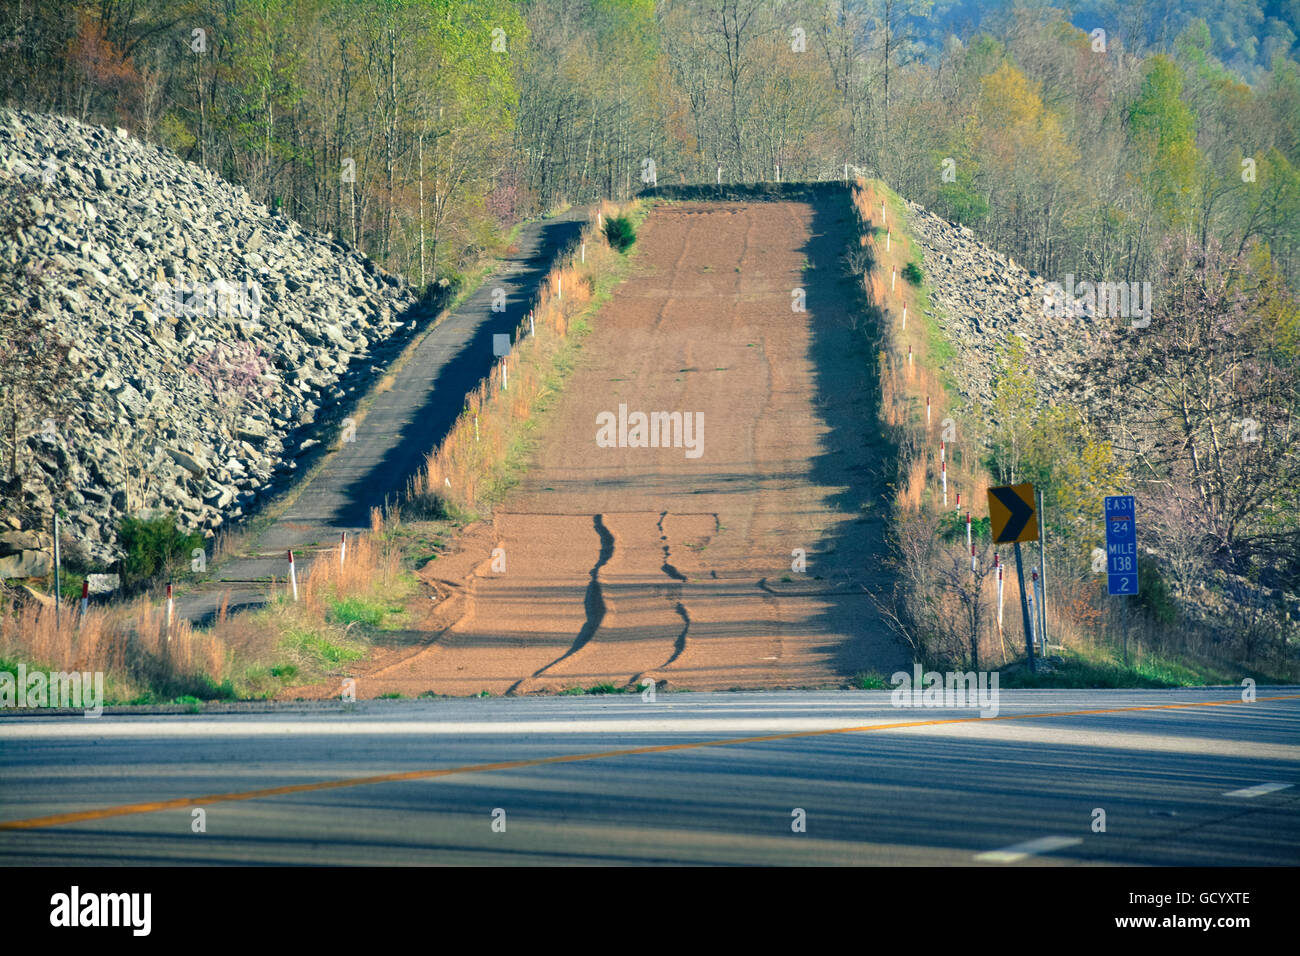 A runaway truck ramp for emergency escape for out of control truckers on interstate highway systems with steep downhill grades Stock Photo